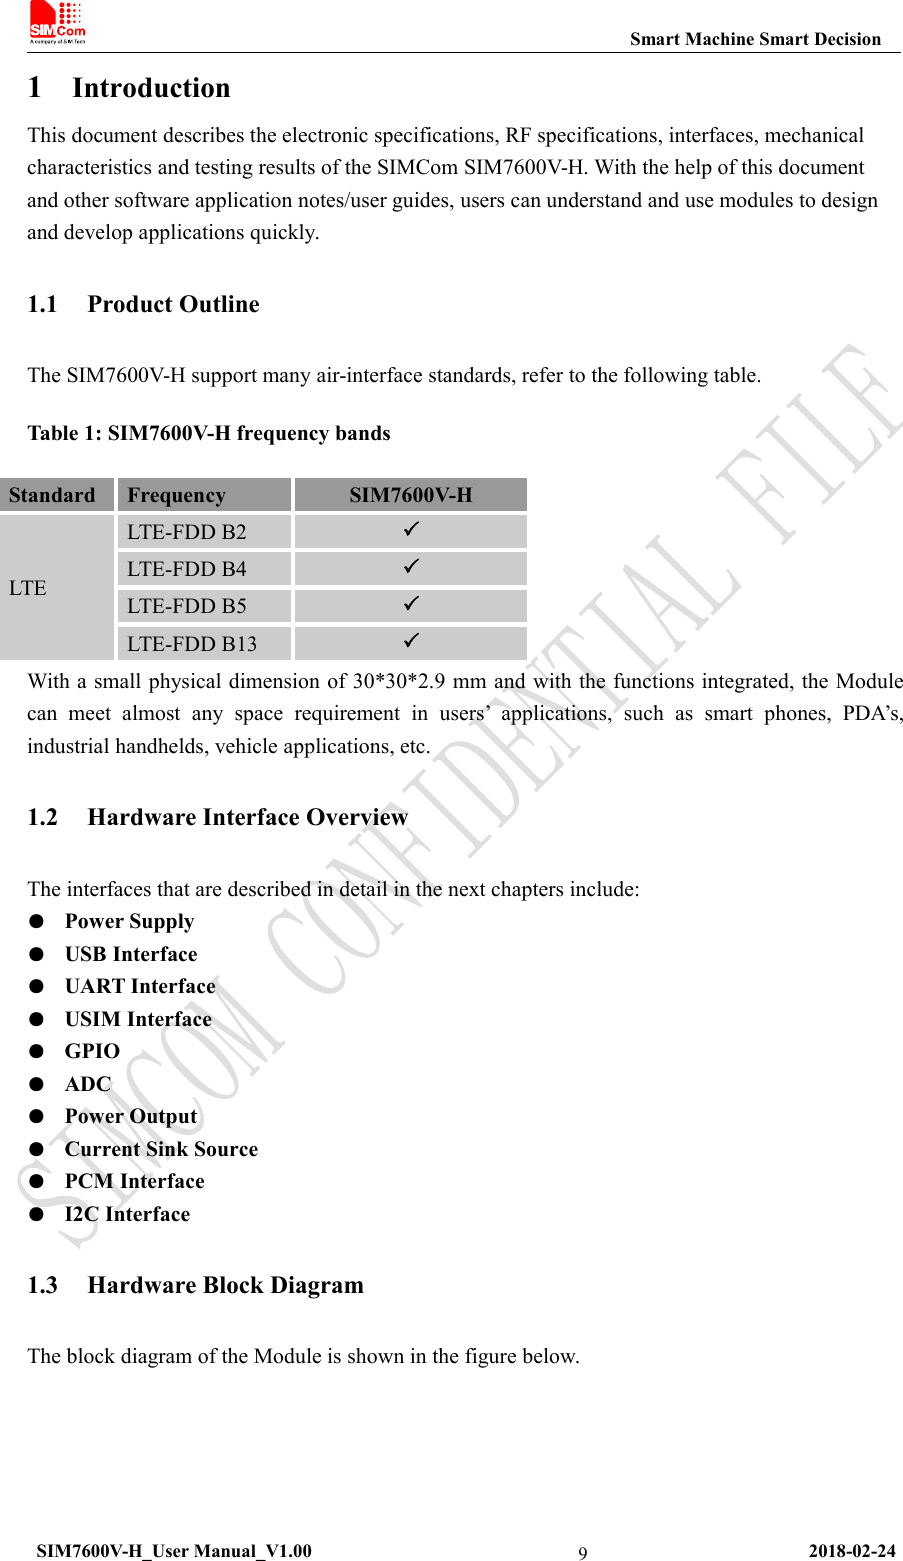 Smart Machine Smart DecisionSIM7600V-H_User Manual_V1.00 2018-02-2491IntroductionThis document describes the electronic specifications, RF specifications, interfaces, mechanicalcharacteristics and testing results of the SIMCom SIM7600V-H. With the help of this documentand other software application notes/user guides, users can understand and use modules to designand develop applications quickly.1.1 Product OutlineThe SIM7600V-H support many air-interface standards, refer to the following table.Table 1: SIM7600V-H frequency bandsStandardFrequencySIM7600V-HLTELTE-FDD B2LTE-FDD B4LTE-FDD B5LTE-FDD B13With a small physical dimension of 30*30*2.9 mm and with the functions integrated, the Modulecan meet almost any space requirement in users’ applications, such as smart phones, PDA’s,industrial handhelds, vehicle applications, etc.1.2 Hardware Interface OverviewThe interfaces that are described in detail in the next chapters include:●Power Supply●USB Interface●UART Interface●USIM Interface●GPIO●ADC●Power Output●Current Sink Source●PCM Interface●I2C Interface1.3 Hardware Block DiagramThe block diagram of the Module is shown in the figure below.